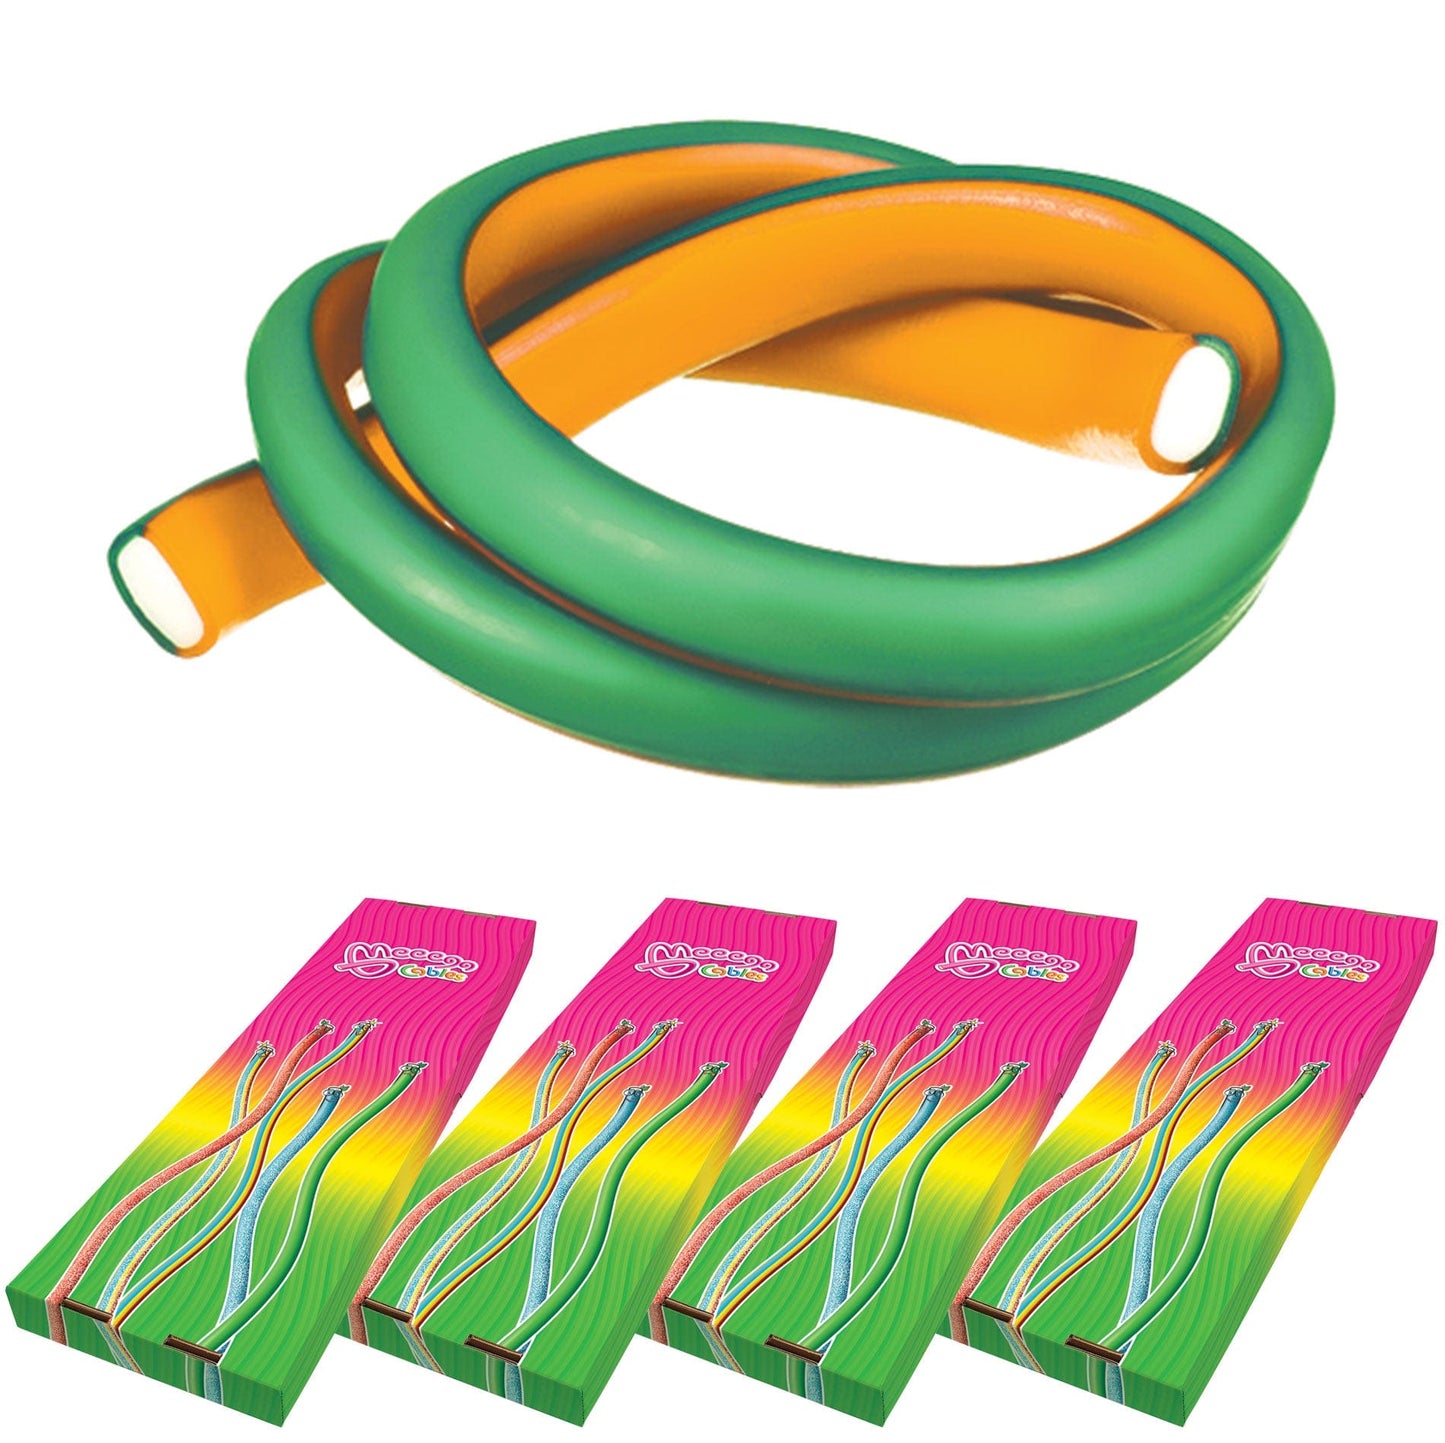 Novelty Concessions Gummy Rope ORANGE LIME / 4 Pack (120 pieces) Meeega Cables European Chewy Rope Candy - Box of 30 individually wrapped Meeega Cables, each over 2-feet long cups with lids and straws